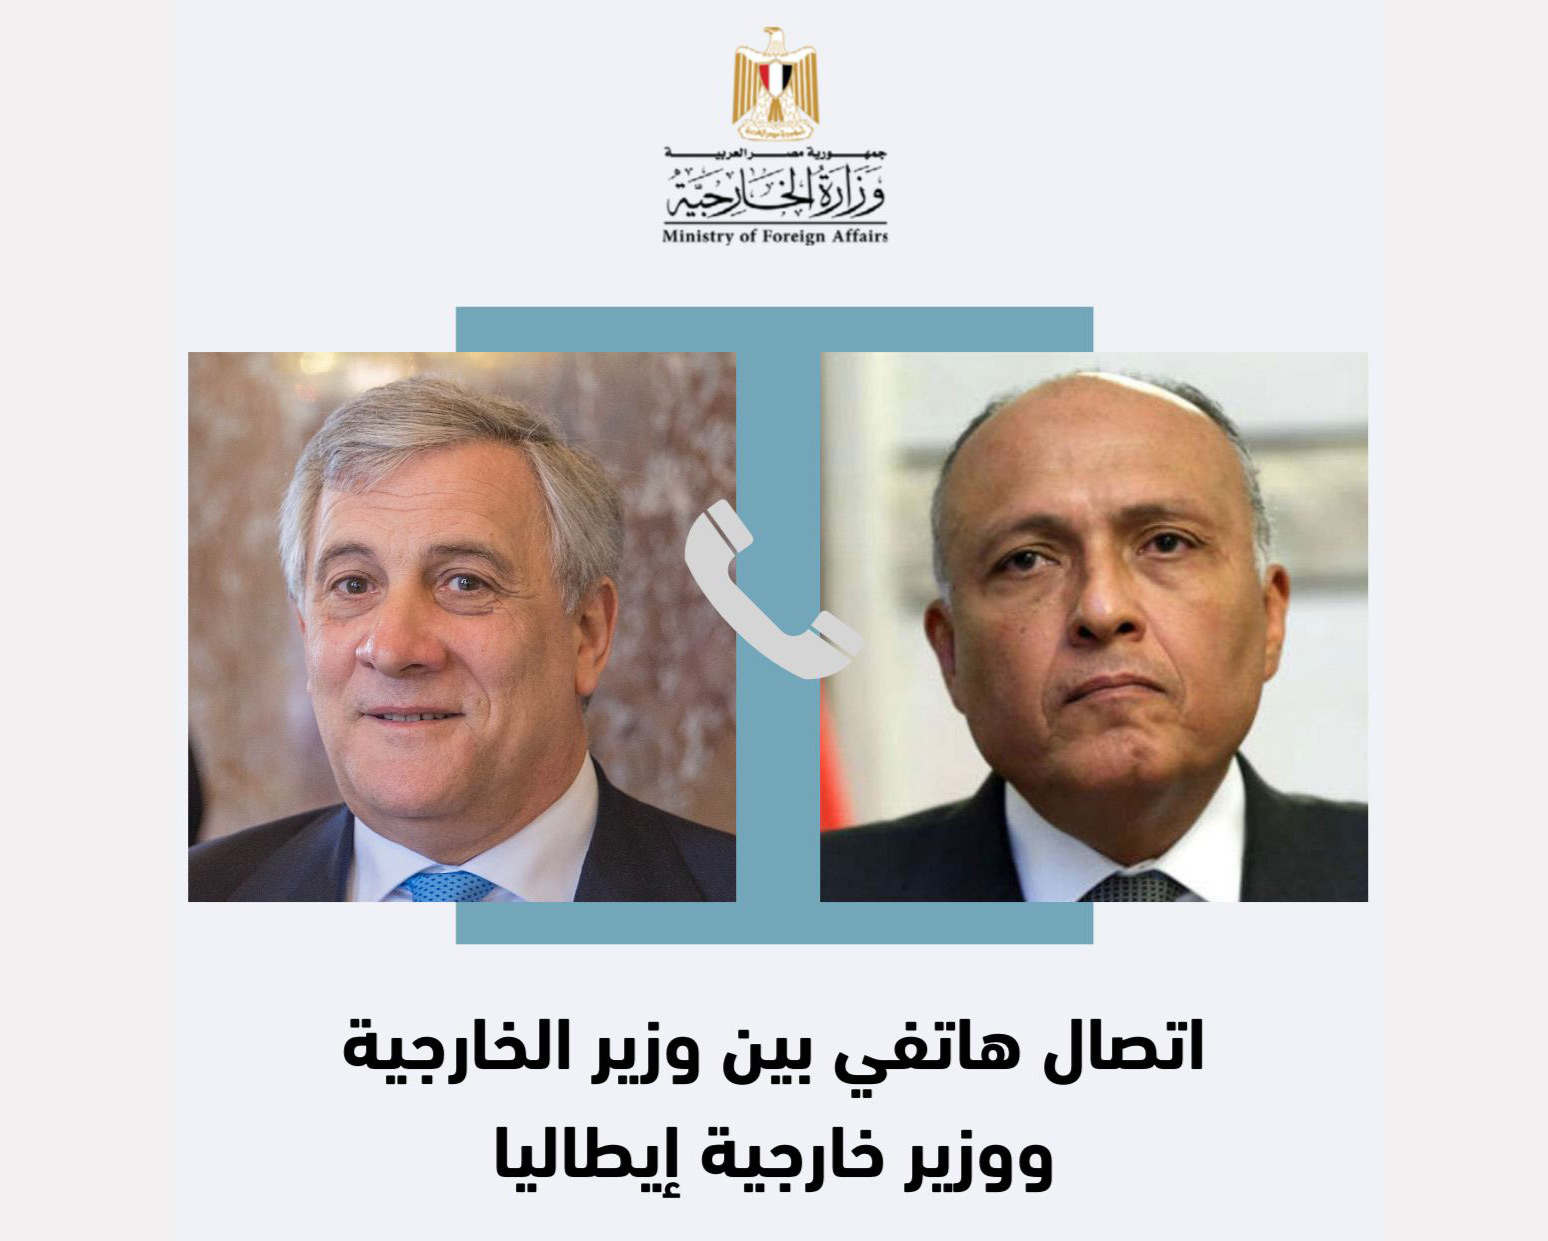 Minister of Foreign Affairs of Egypt and Italy, bilateral relations